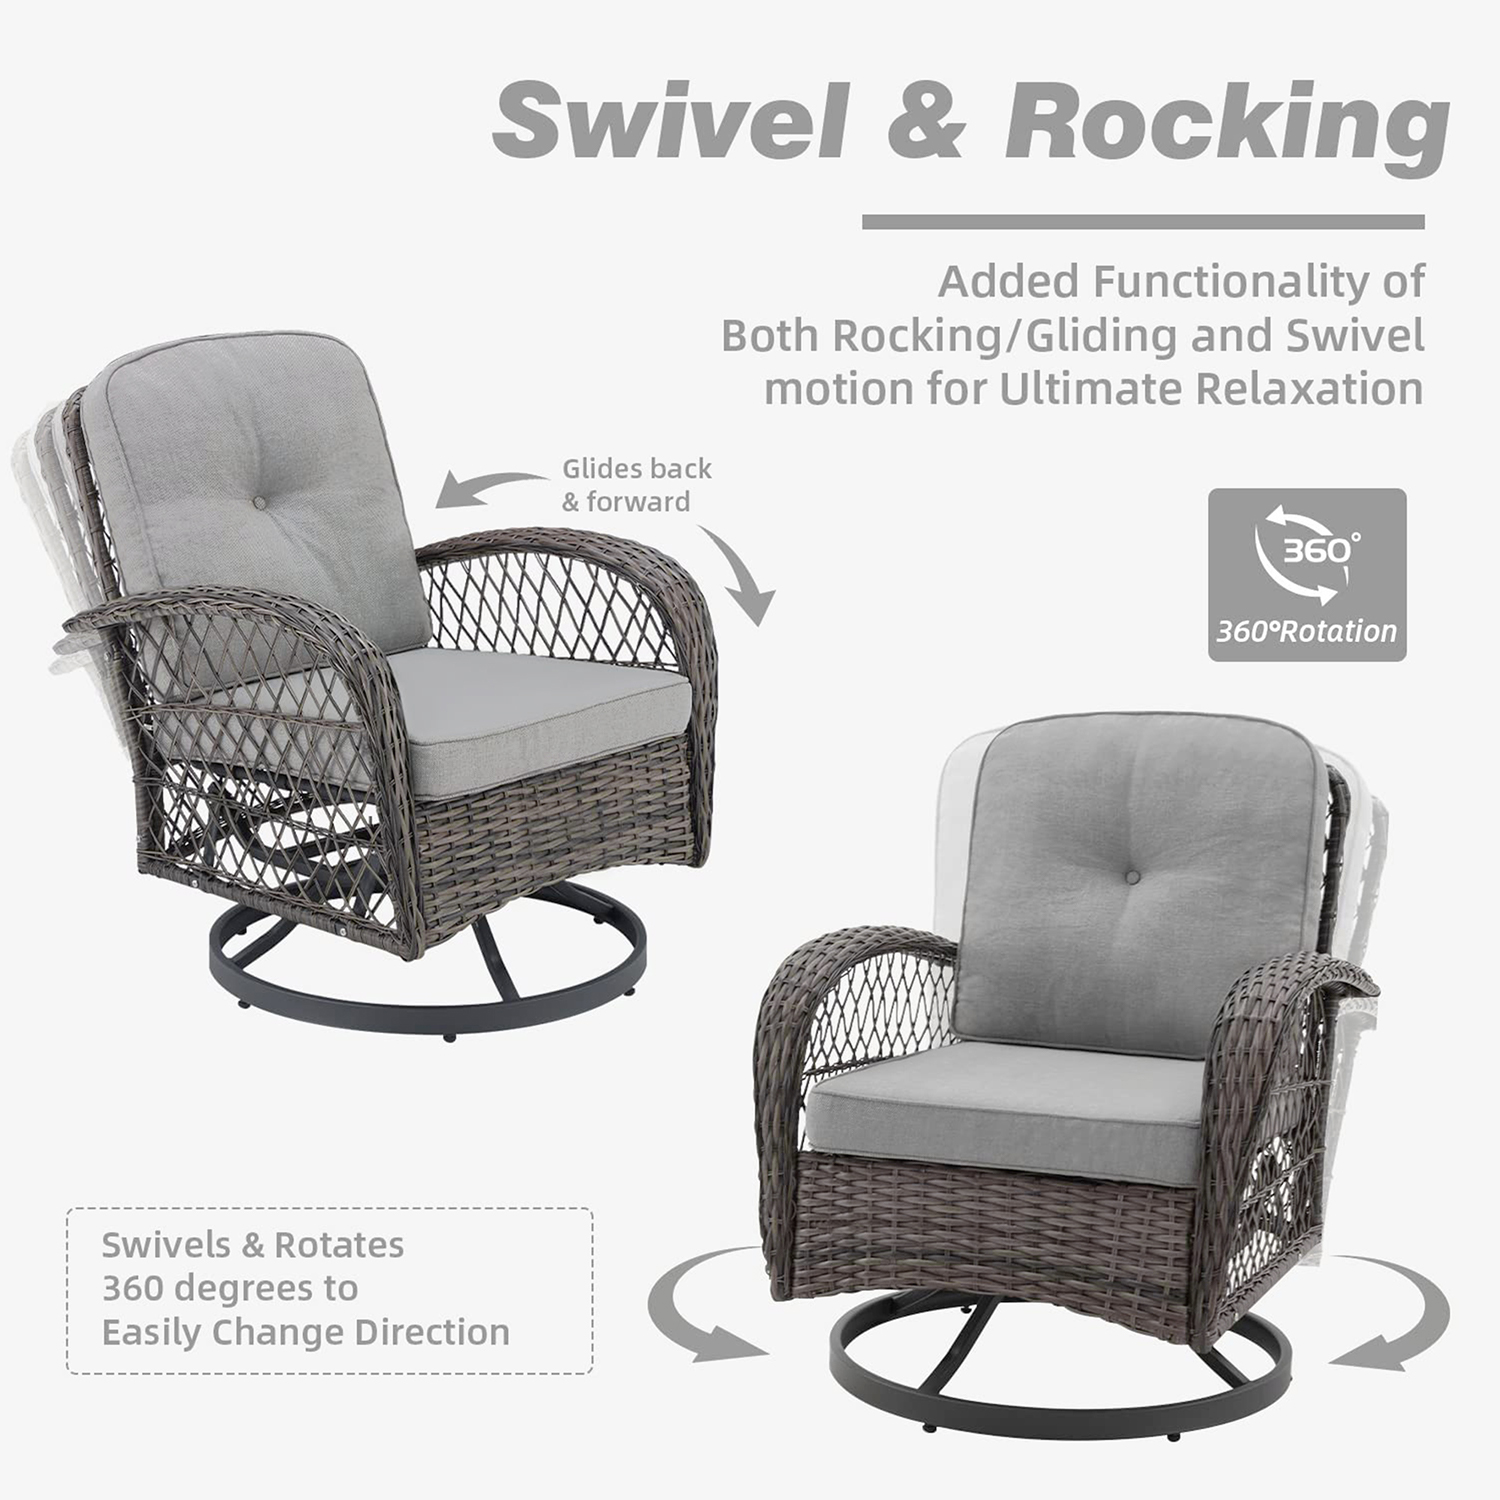 Segmart Swivel Rocking Chairs Patio Conversation Furniture Set, 3-Piece Outdoor 360° Rocking Patio Conversation Set with Thickened Cushions and Glass Coffee Table for Backyard, 275 LBS, Grey - image 5 of 10